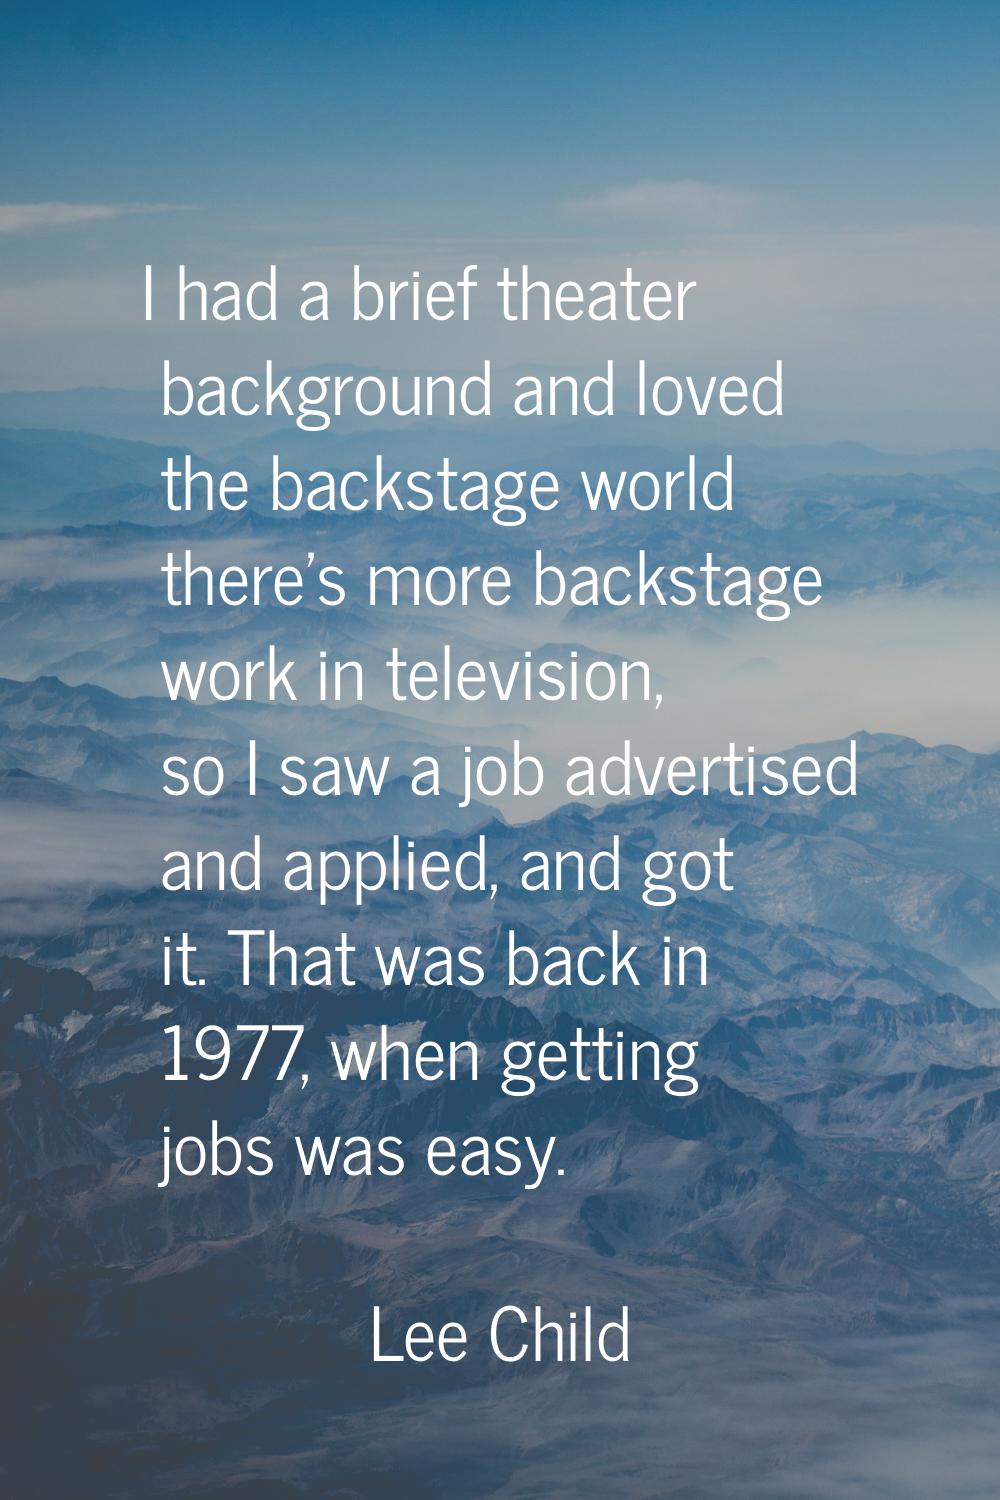 I had a brief theater background and loved the backstage world there's more backstage work in telev